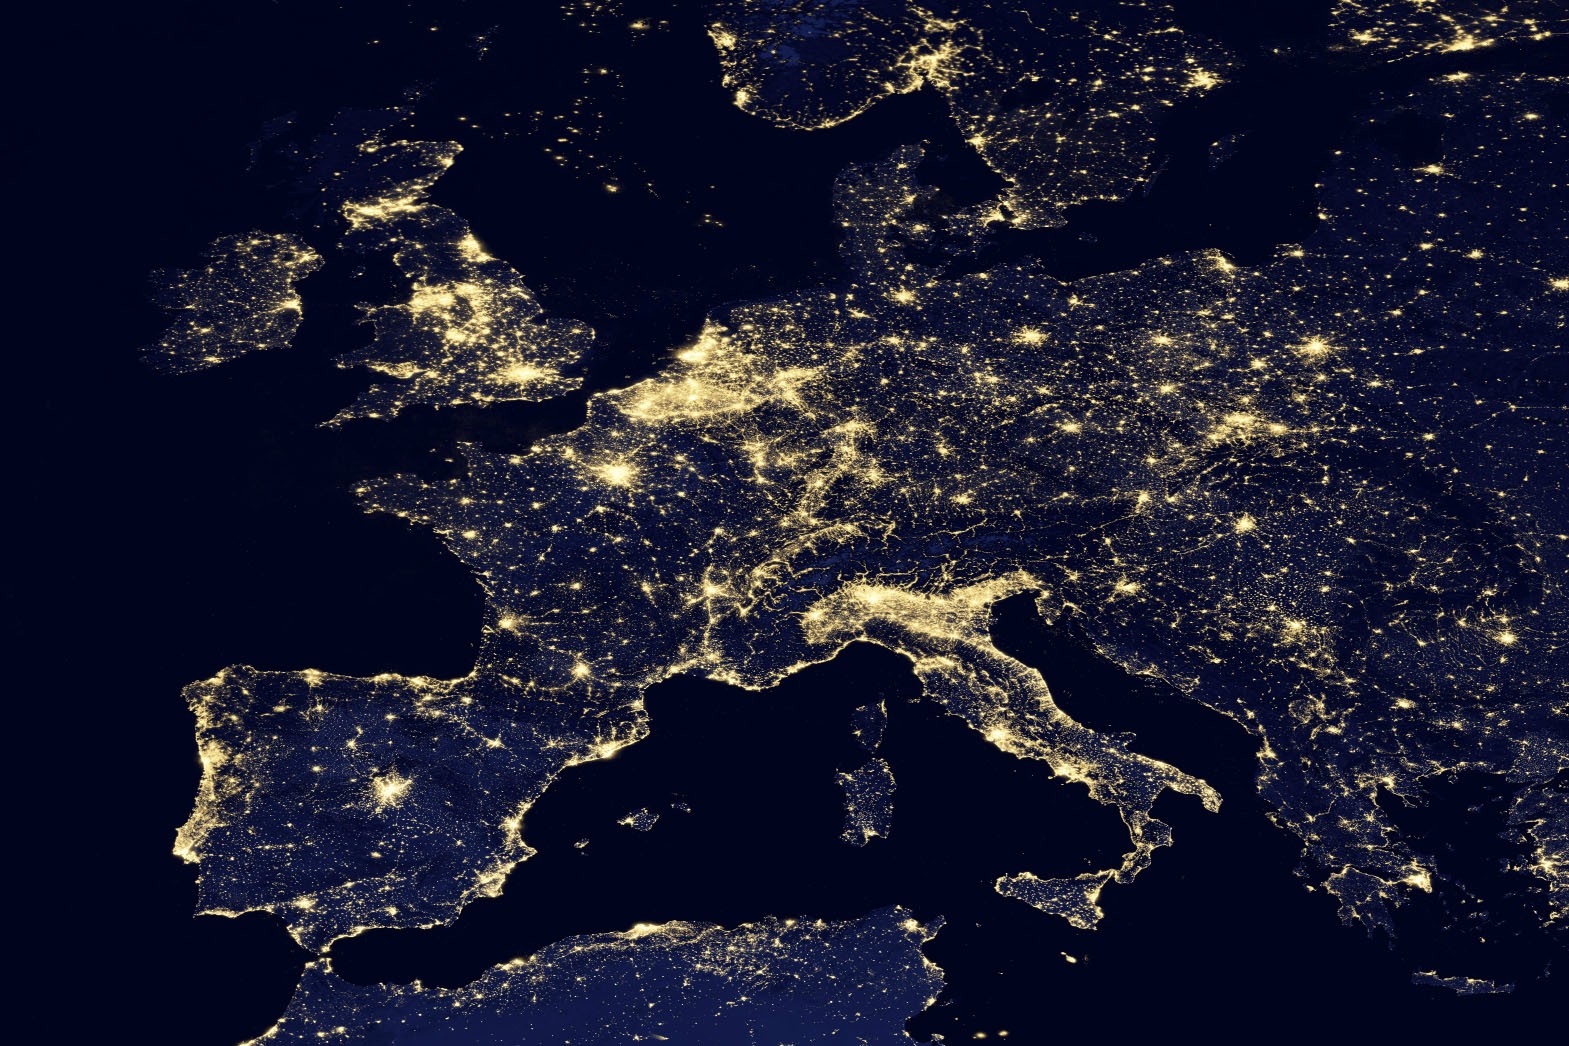 europe-at-night-from-space-nasa-zombie-population-map-europe